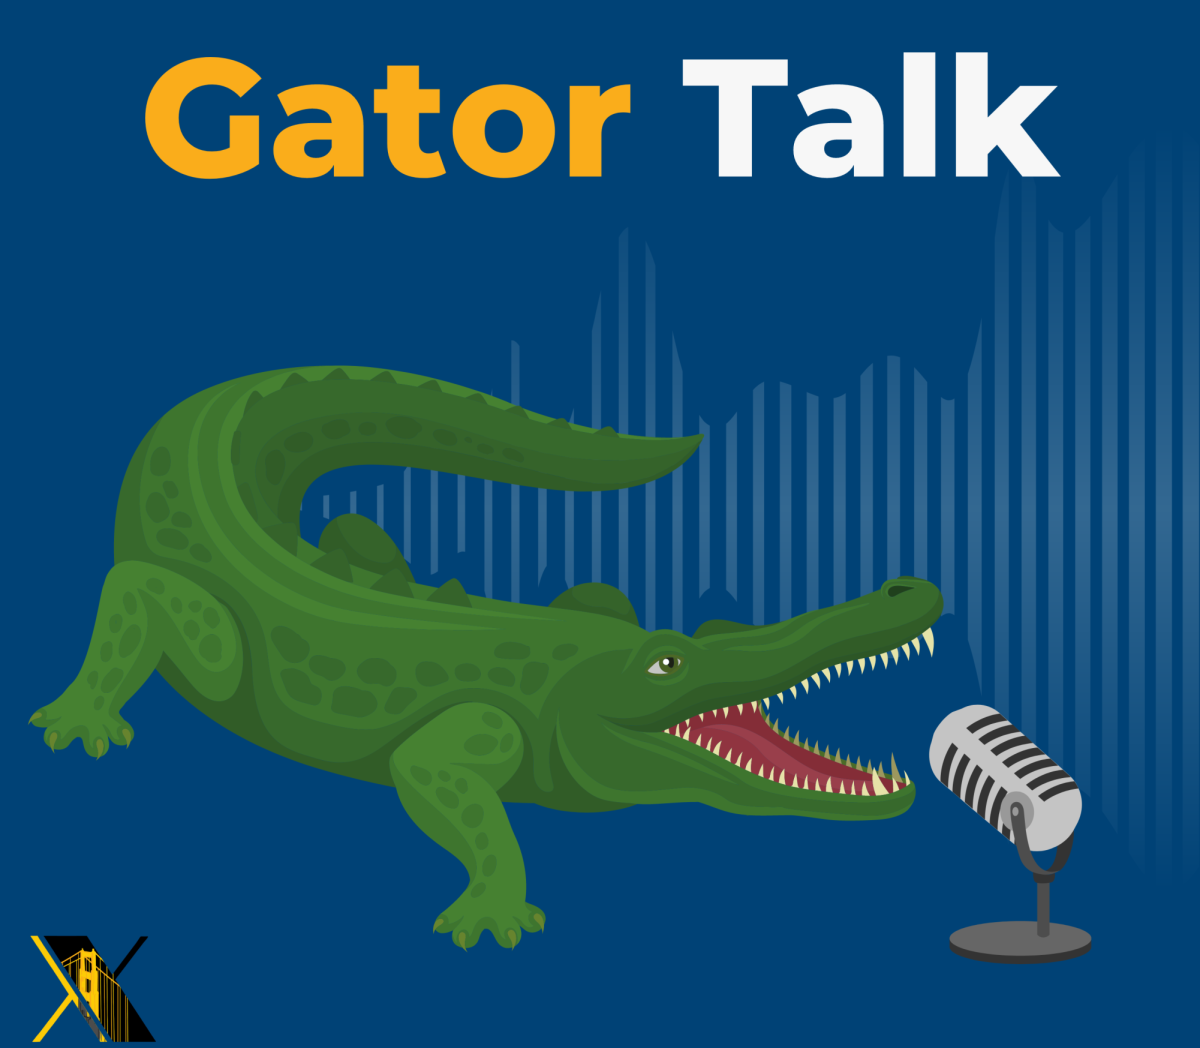 Gator+Talk%3A+The+untold+stories+of+Cesar+Chavez+through+the+eyes+of+one+of+his+closest+colleagues